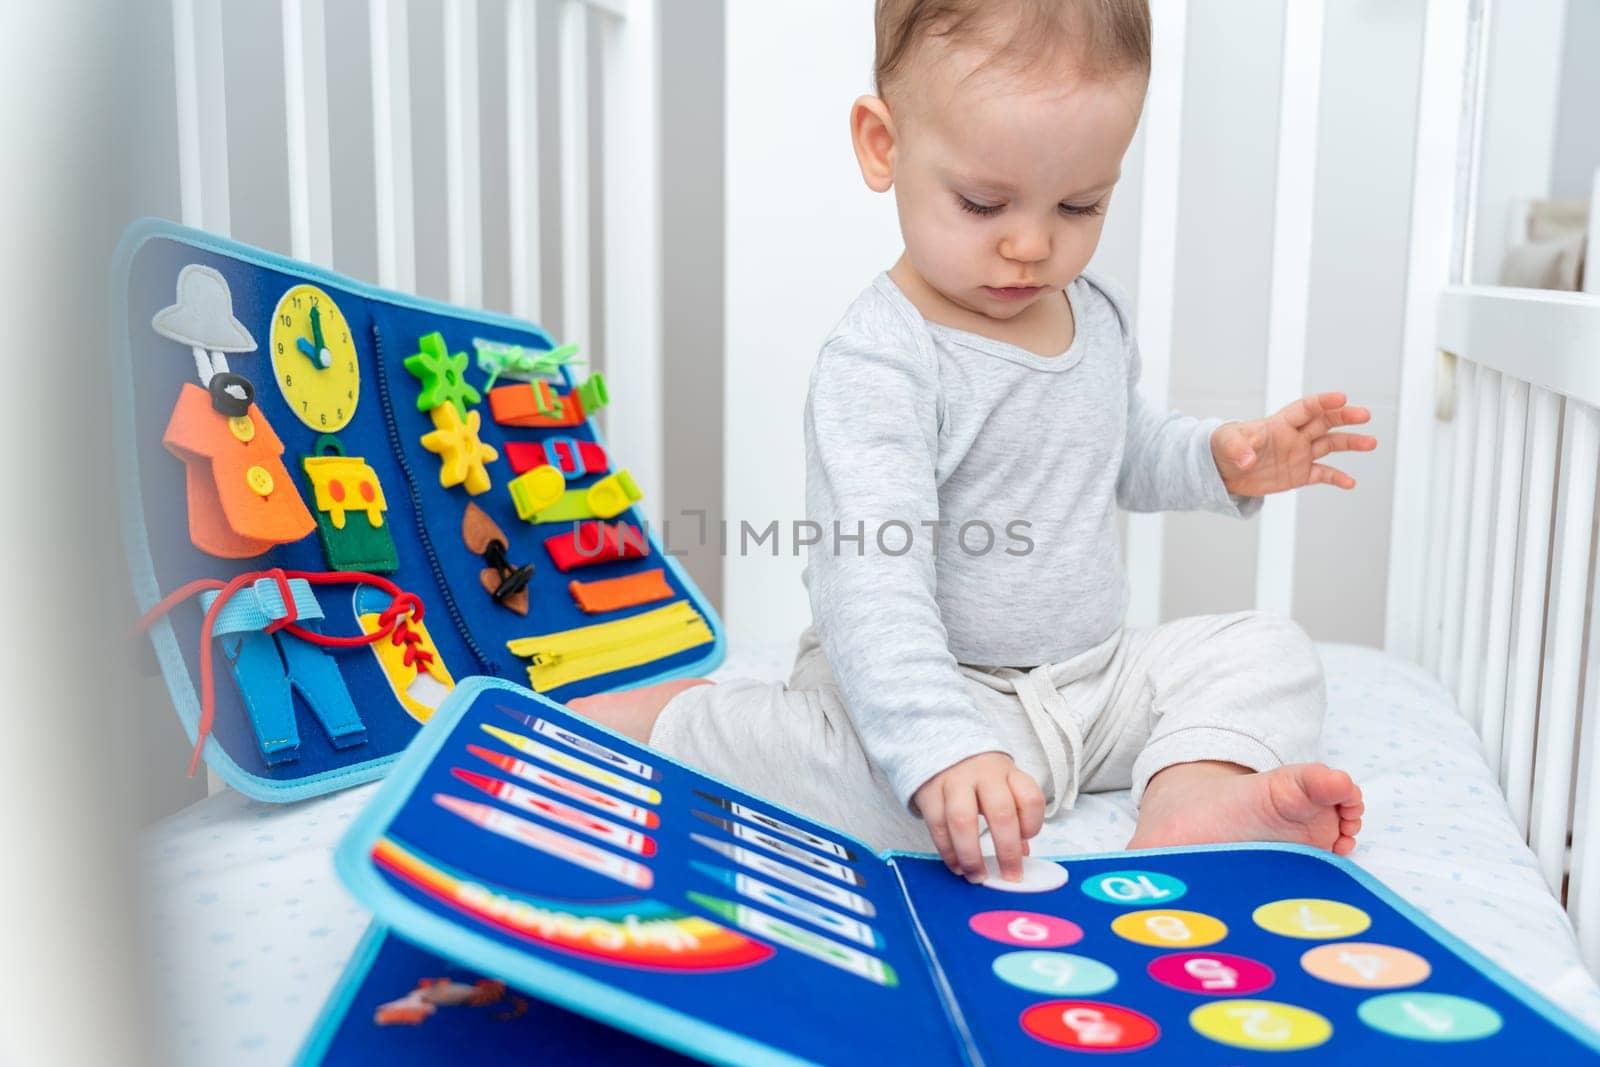 Baby playing with montessori quiet book sitting in a crib. Concept of smart books and modern educational toys by Mariakray